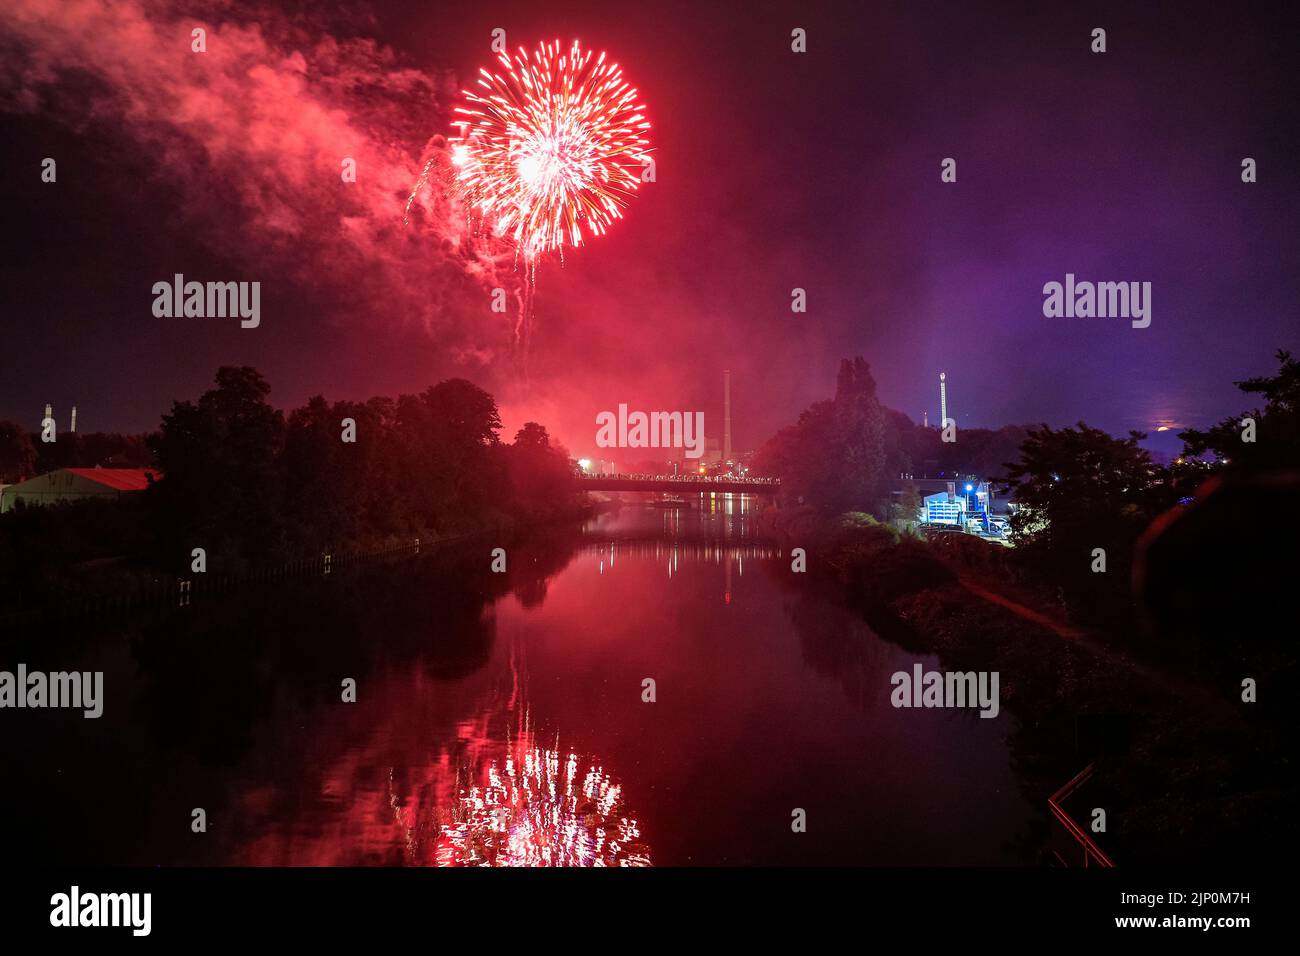 Herne, NRW, Germany. 14th Aug, 2022. Fireworks over the canal conclude the final day of the fair. Cranger Kirmes, Germany's 3rd largest funfair with a tradition dating back to the middle ages, has returned to pre-pandemic visitor numbers with more than 3.9m attending in hot, sunny weather, enjoying the rides, rollercoasters, beer halls, food and drink. The funfair concluded tonight with fireworks over the nearby Rhine-Herne Canal. Credit: Imageplotter/Alamy Live News Stock Photo